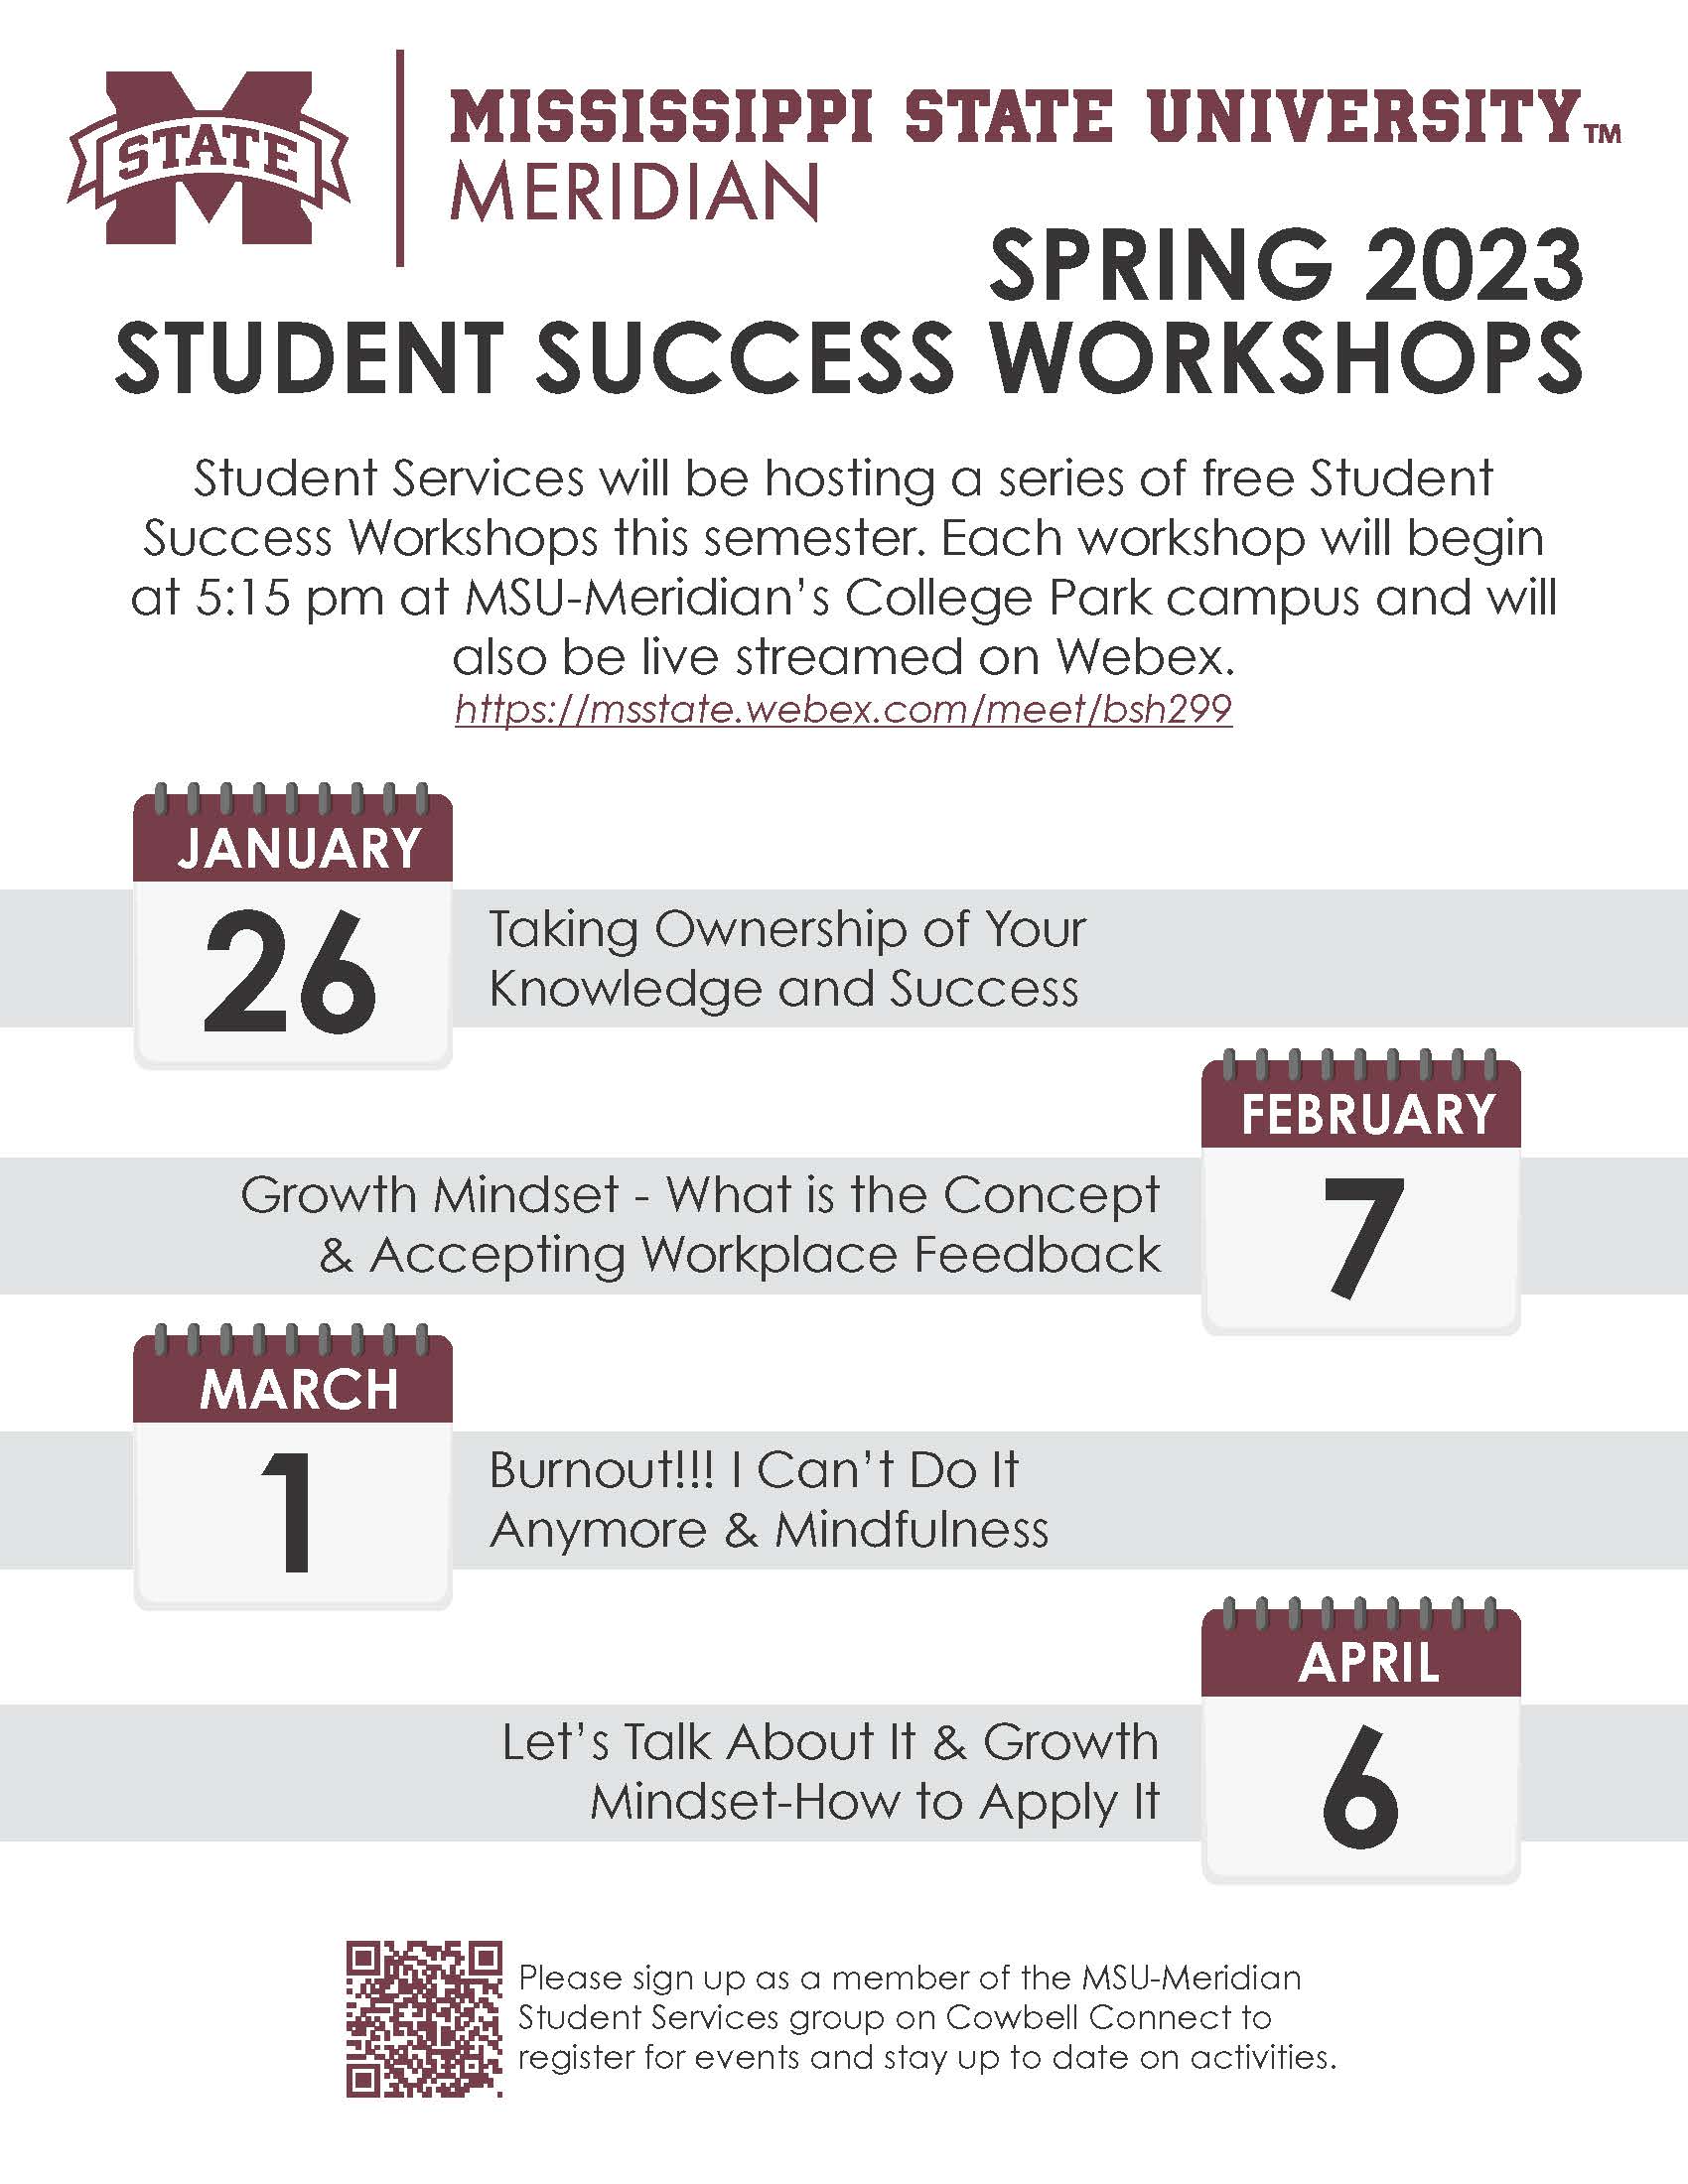 A series of workshops for students